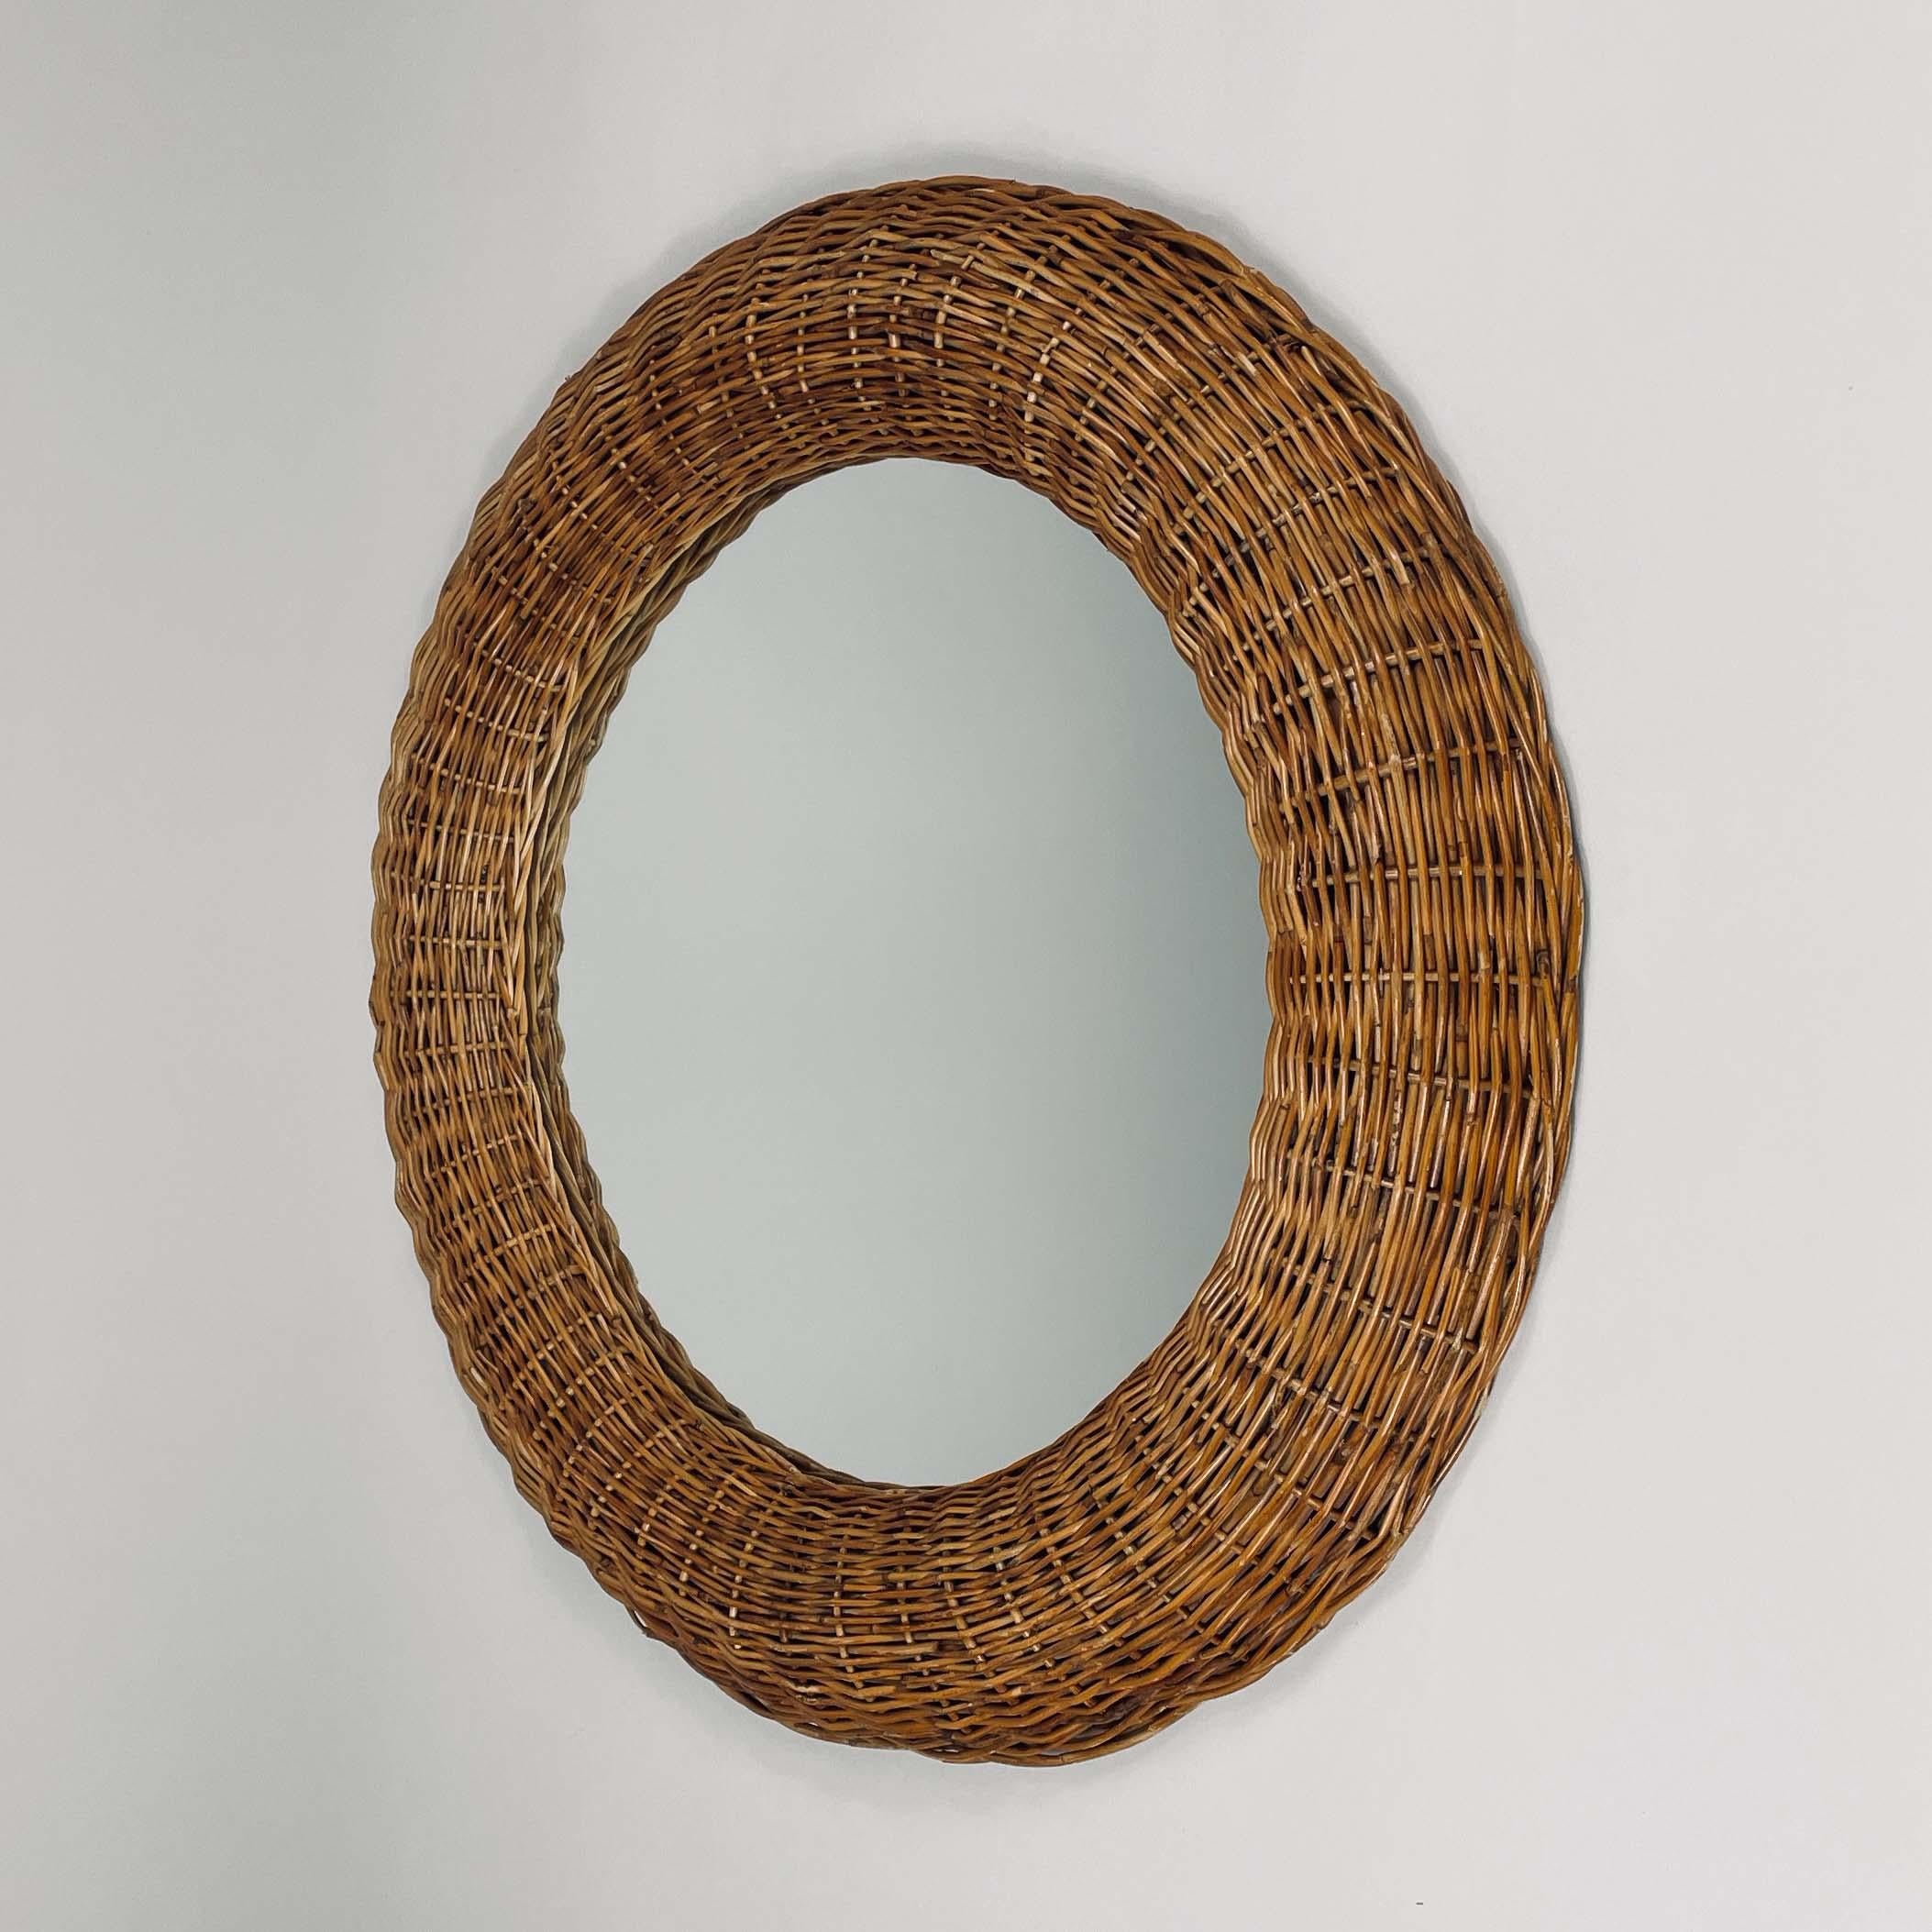 This vintage wall mirror was designed and manufactured in France in the 1950s. It features a hand woven rattan round frame with mirror glass.

Condition is good with few signs of age. Rattan with some minor wear. The mirror glass is original and